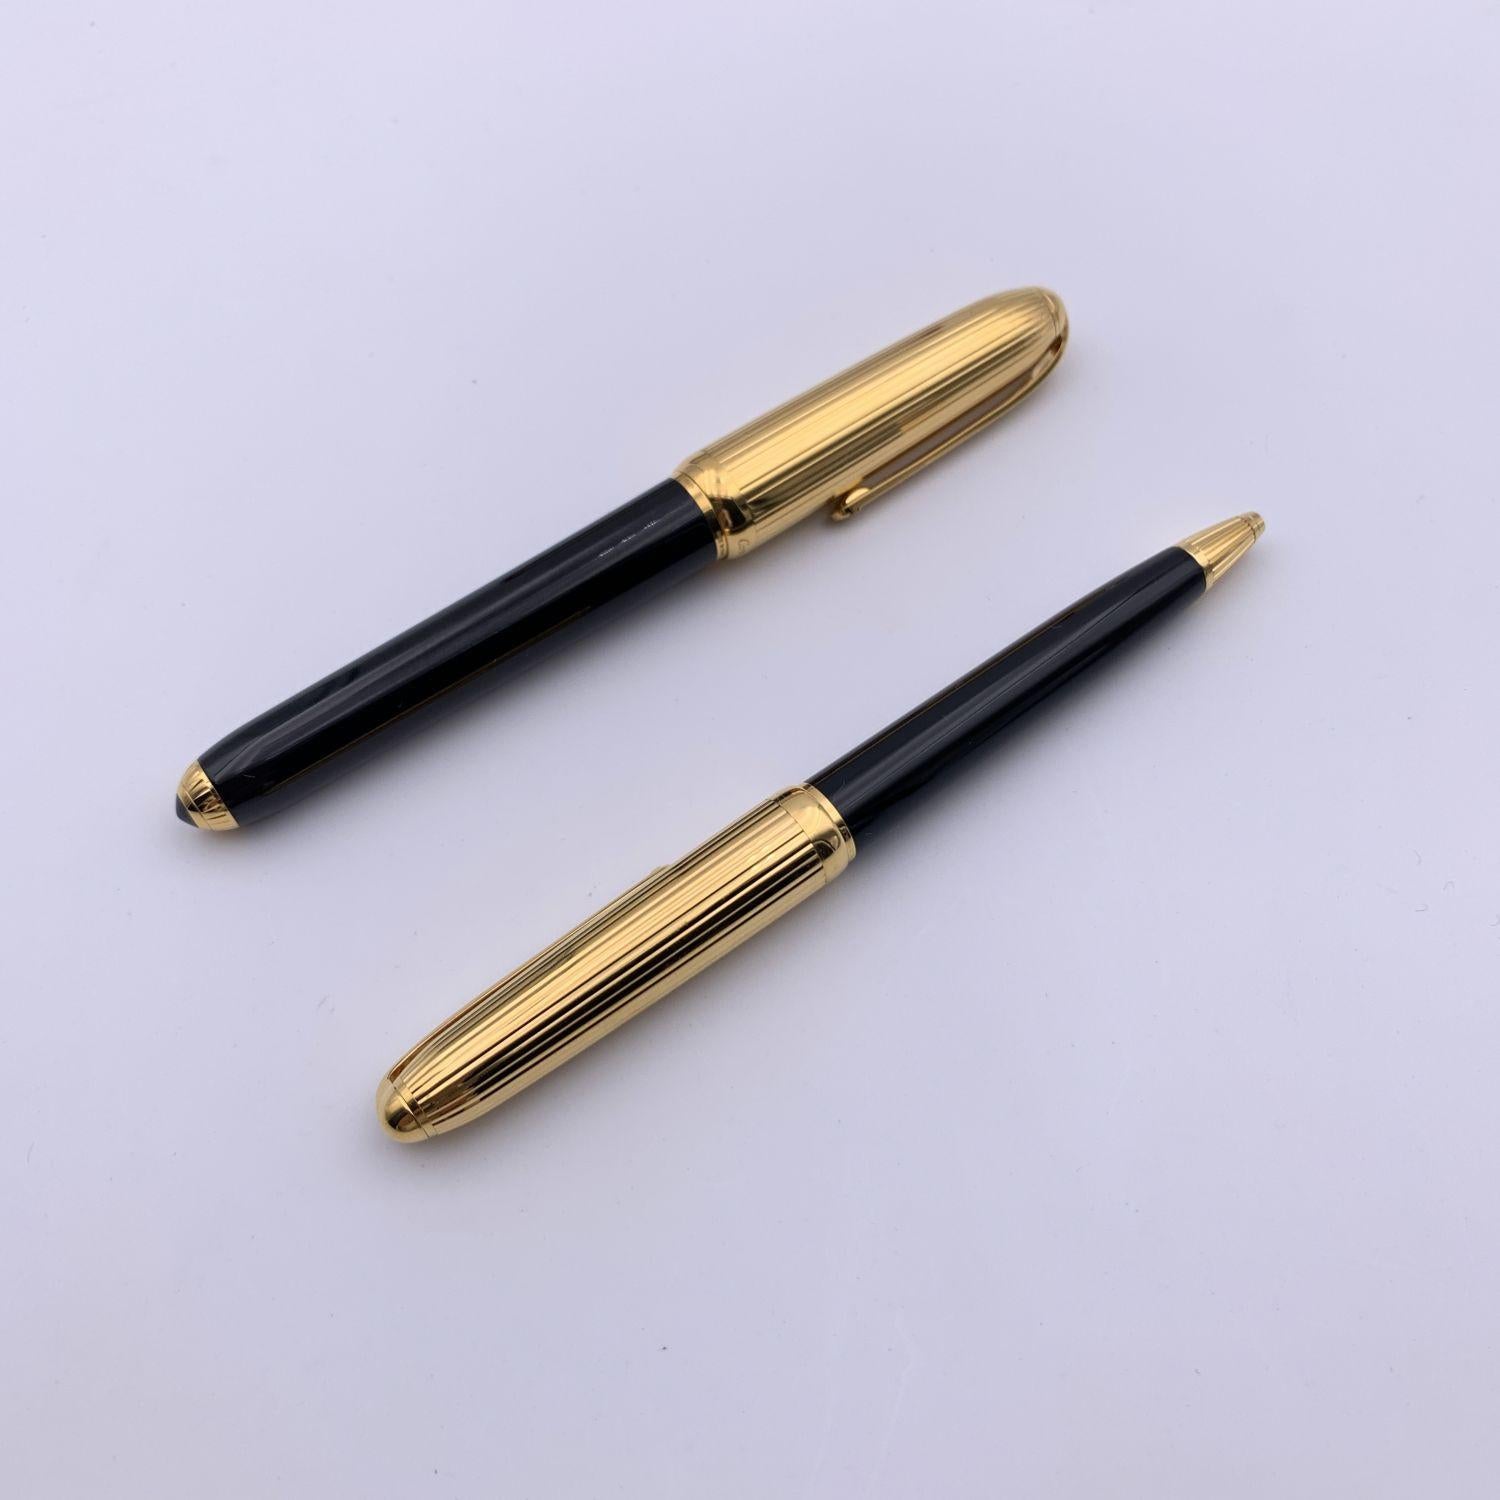 Elegant 'Louis Cartier' set of pens which includes a fountain pen and a ballpoint pen. Black lacquered barrel and gold-plated ribbed cap. 18K yellow gold nib with engraved CC - Cartier logo (18k mark on the nib). The pen is numbered 034917. Total